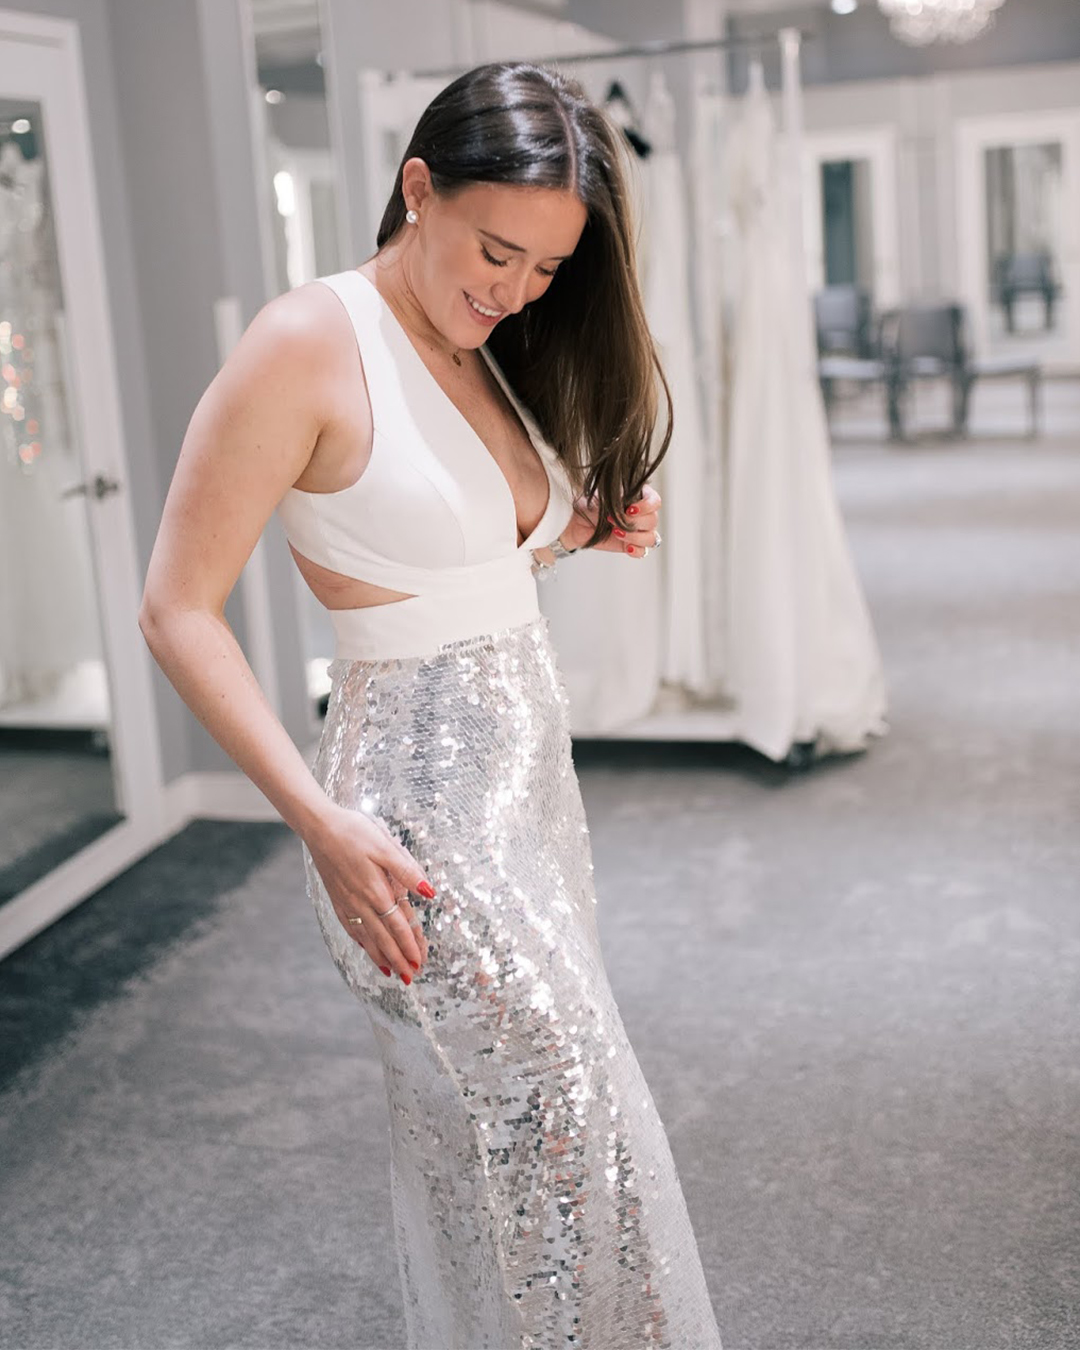 Bride-to-be in long dress with sequin skirt and bodice cutouts | Shopping for after-party dresses at David's Bridal